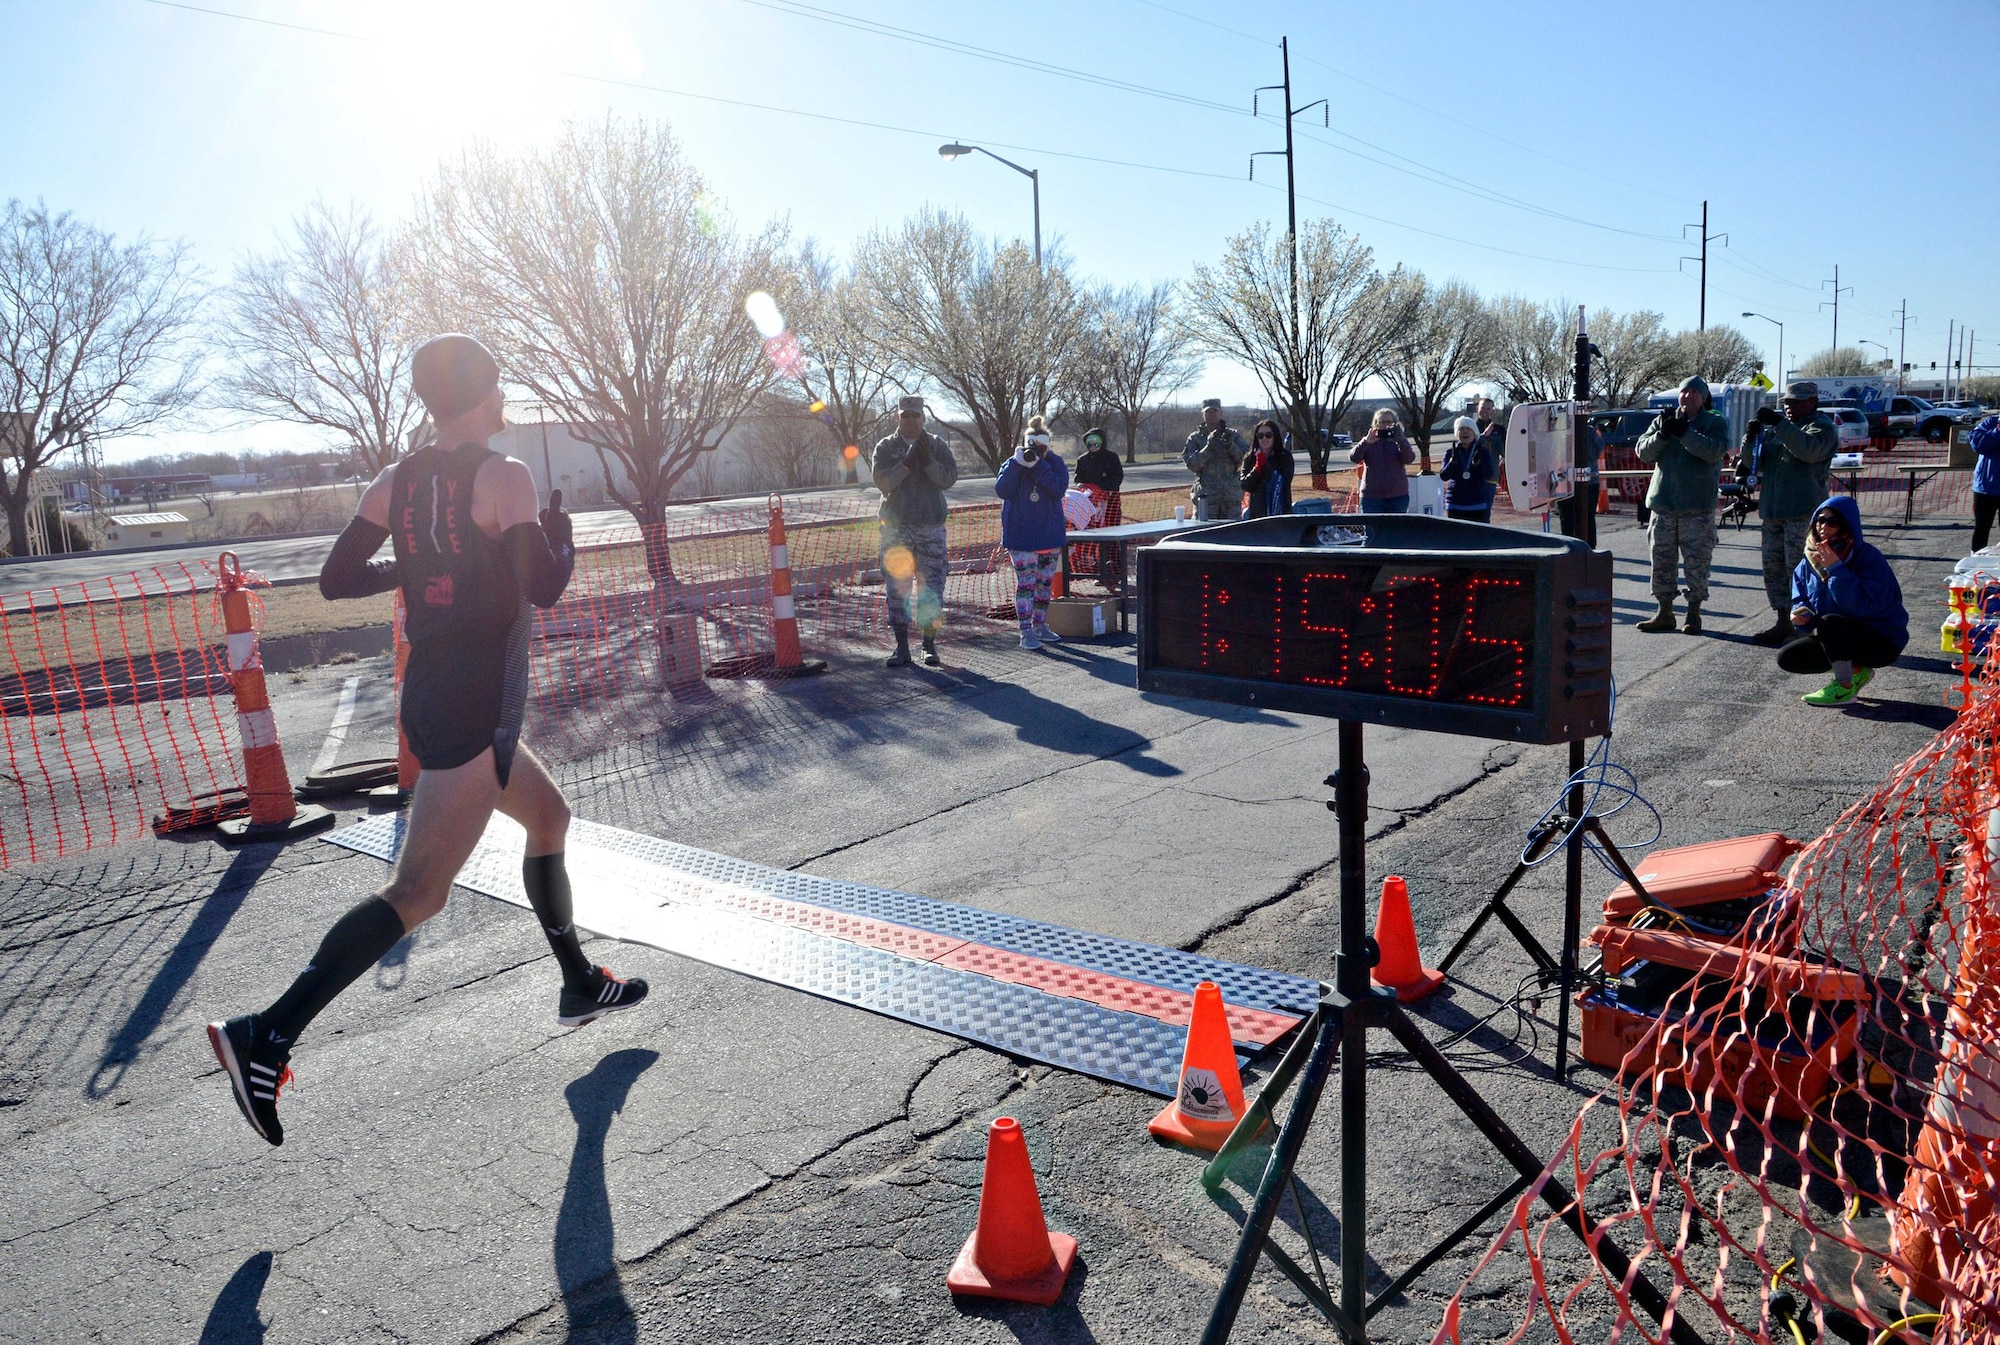 Jason Butler, a tool maker with the 553rd Commodities Maintenance Group, was the first place finisher in the 75th Anniversary Half Marathon, with a final time of 1:15:06.  (Air Force photo by Kelly White)